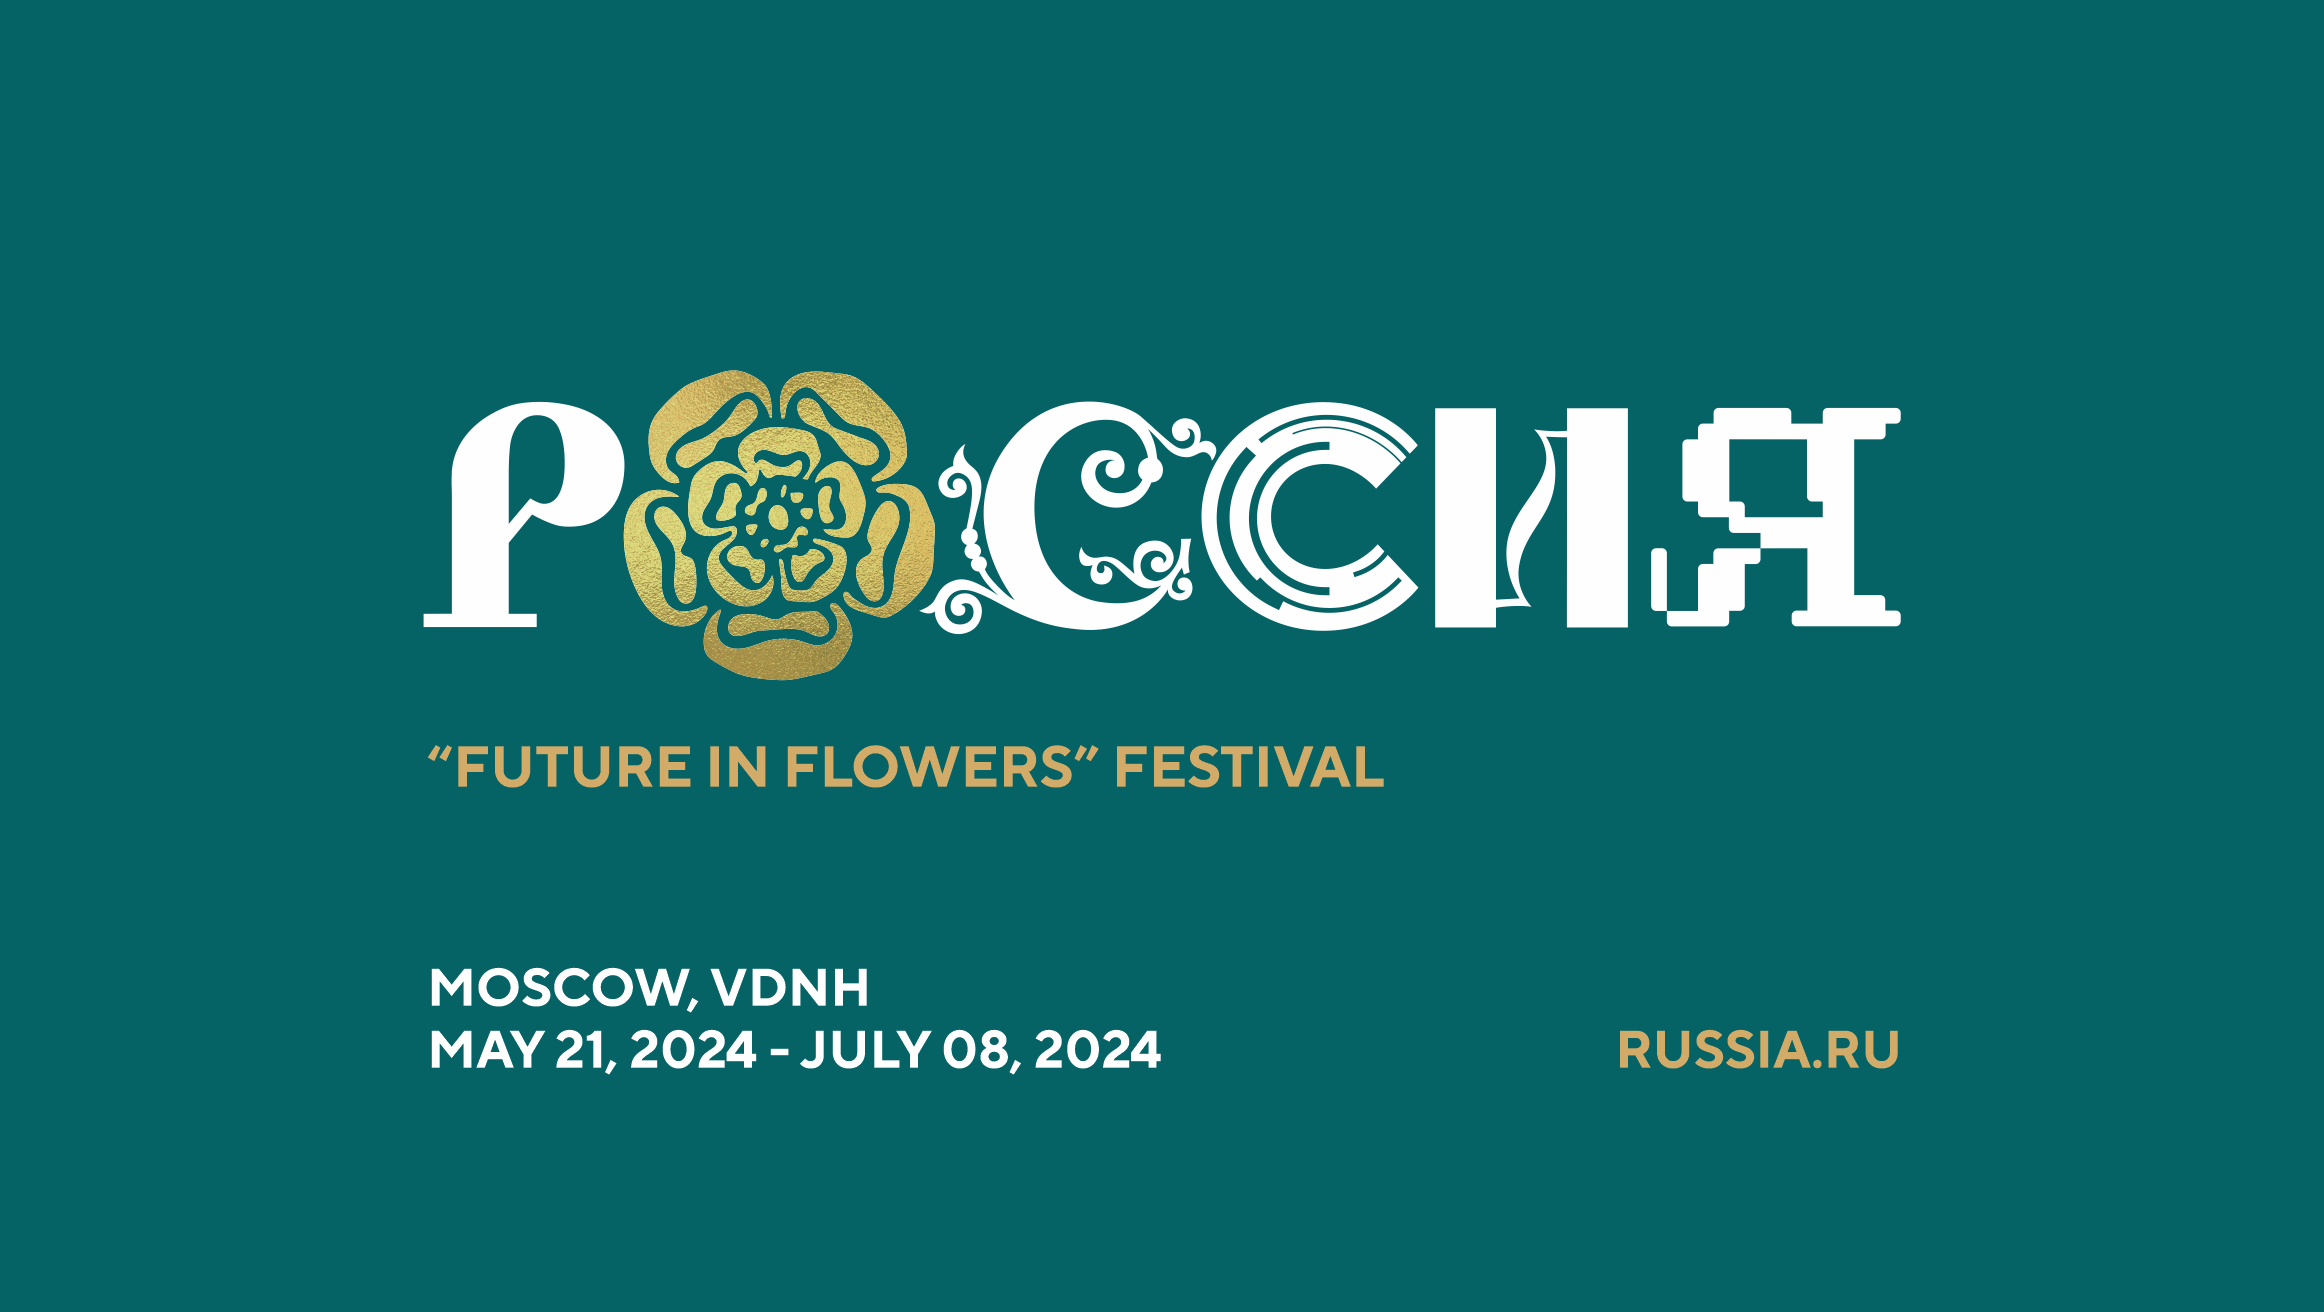 The page of the Future in Flowers festival has been opened on the RUSSIA EXPO website